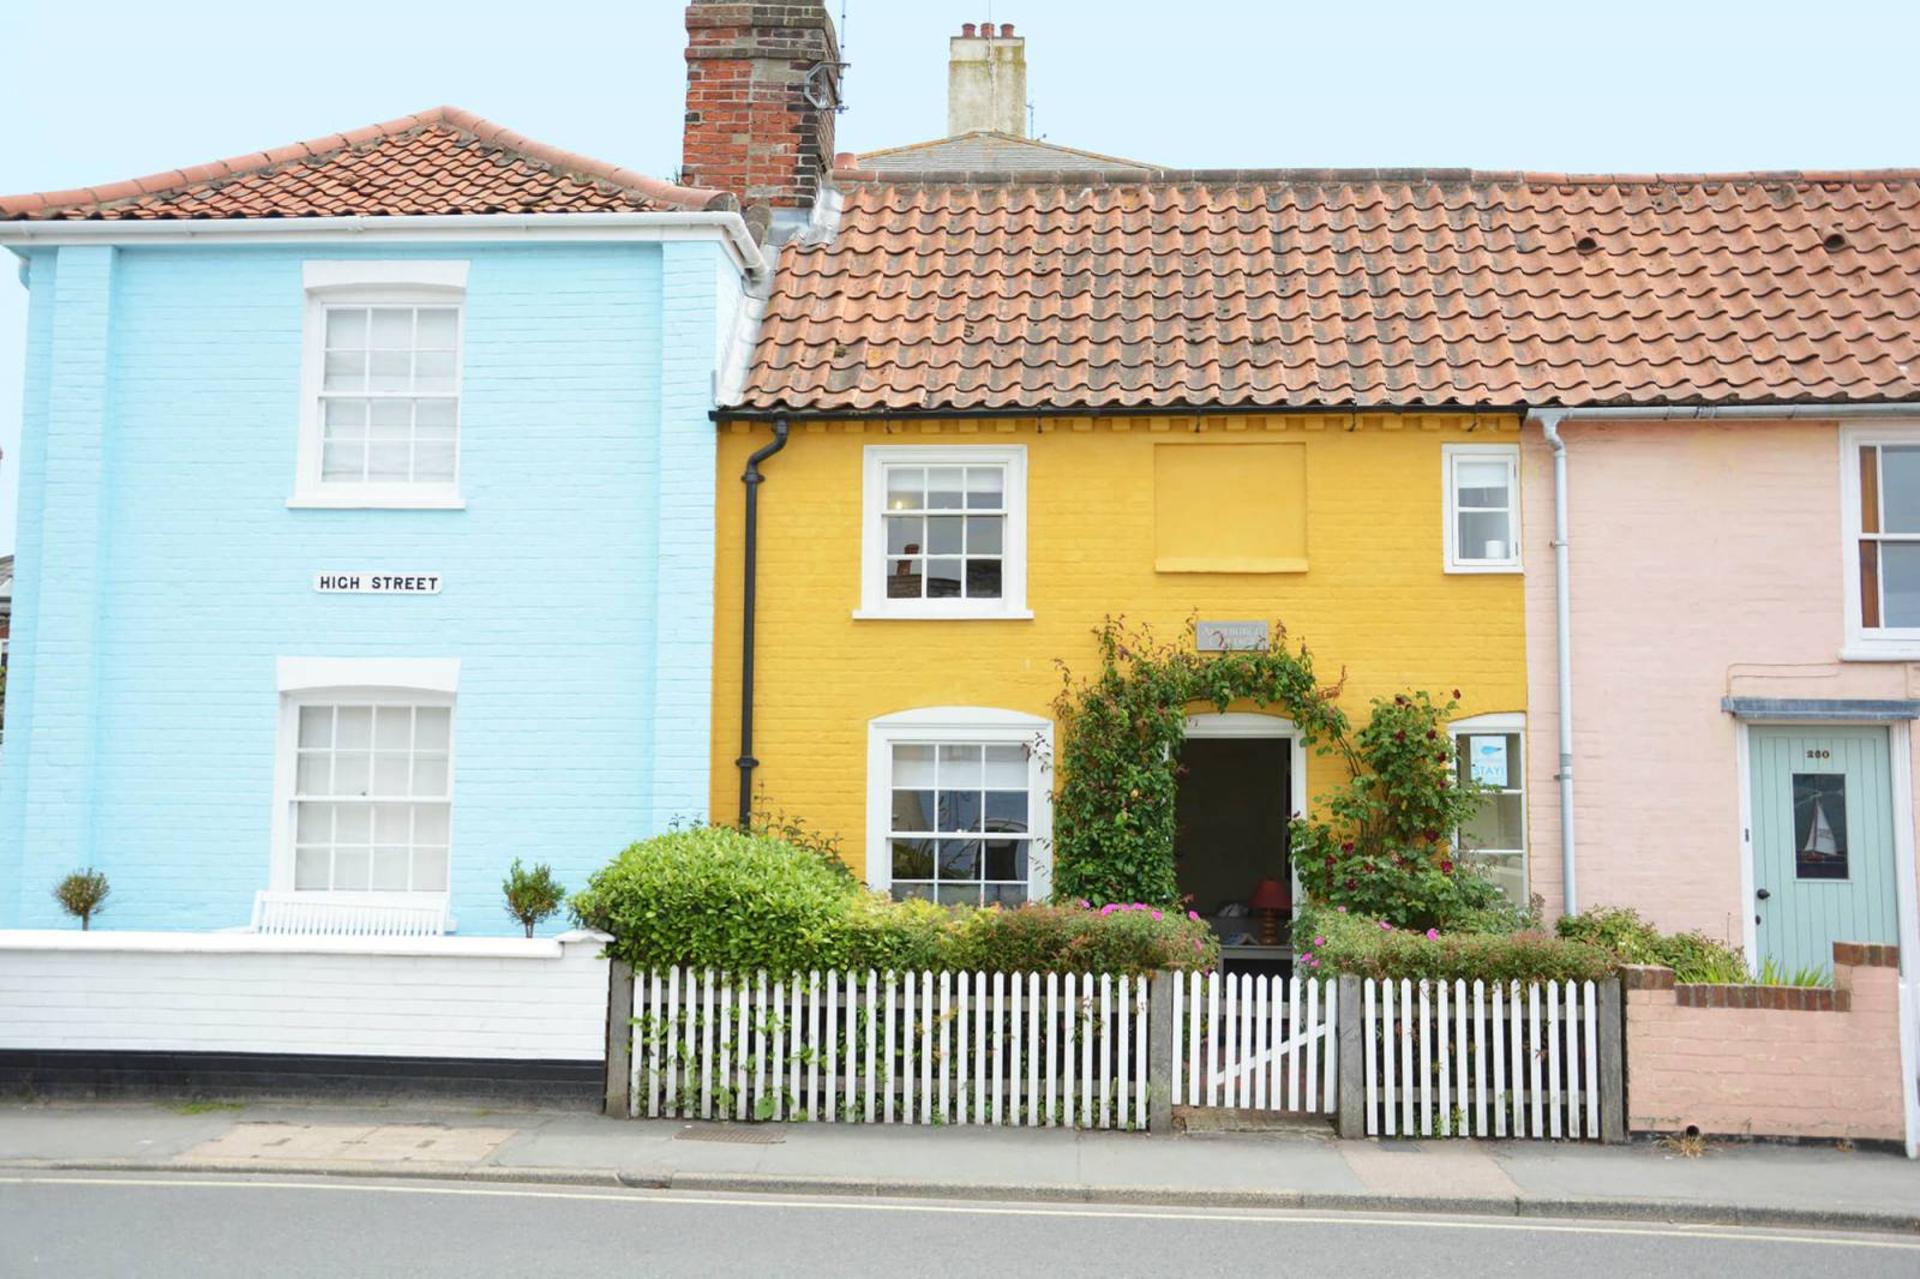 Sykes Holiday Cottages acquires Suffolk firm as staycation M&amp;A continues